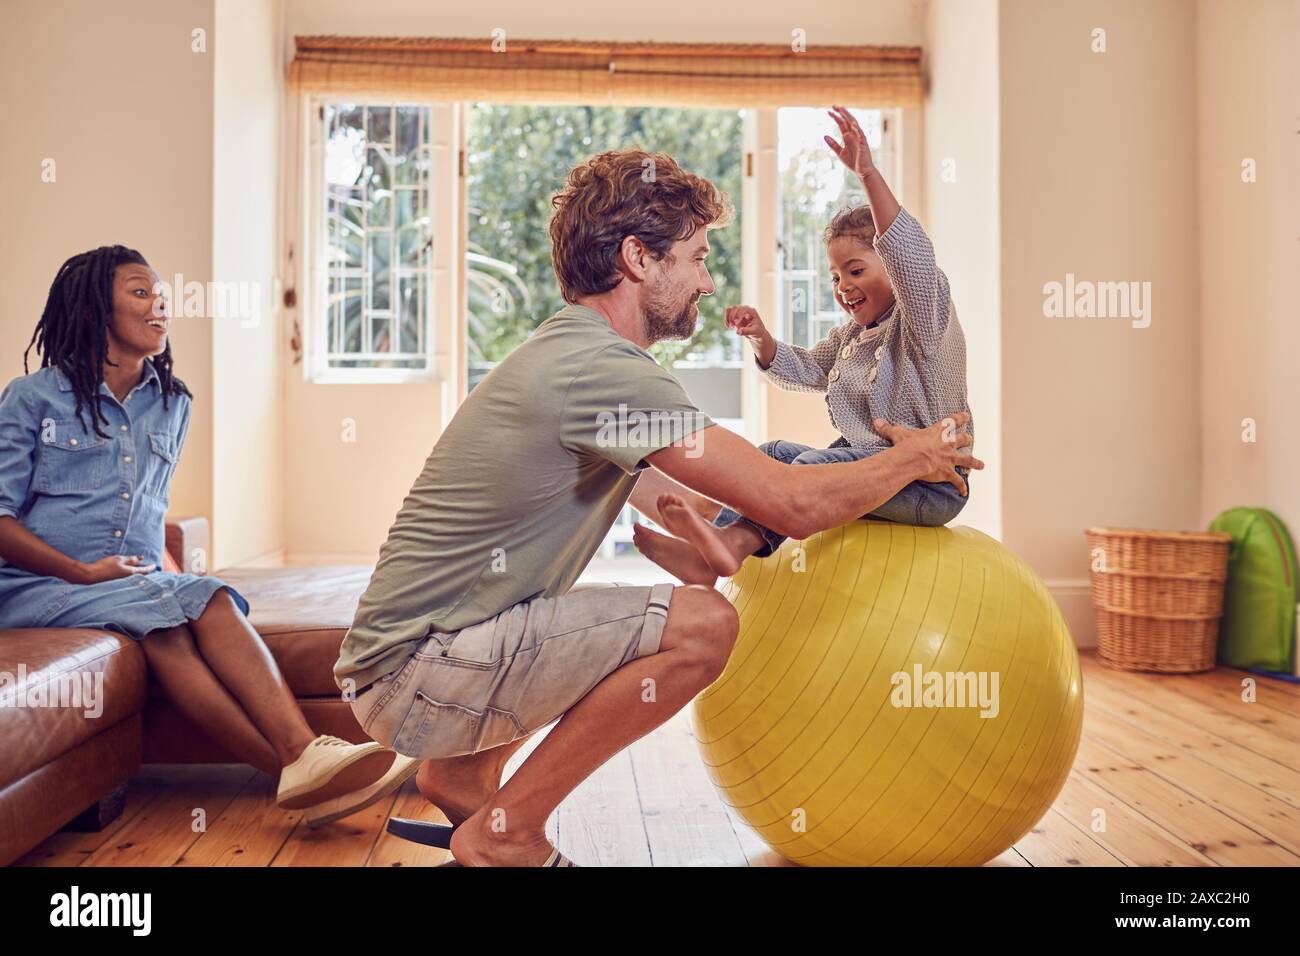 Father and daughter playing with fitness ball Stock Photo